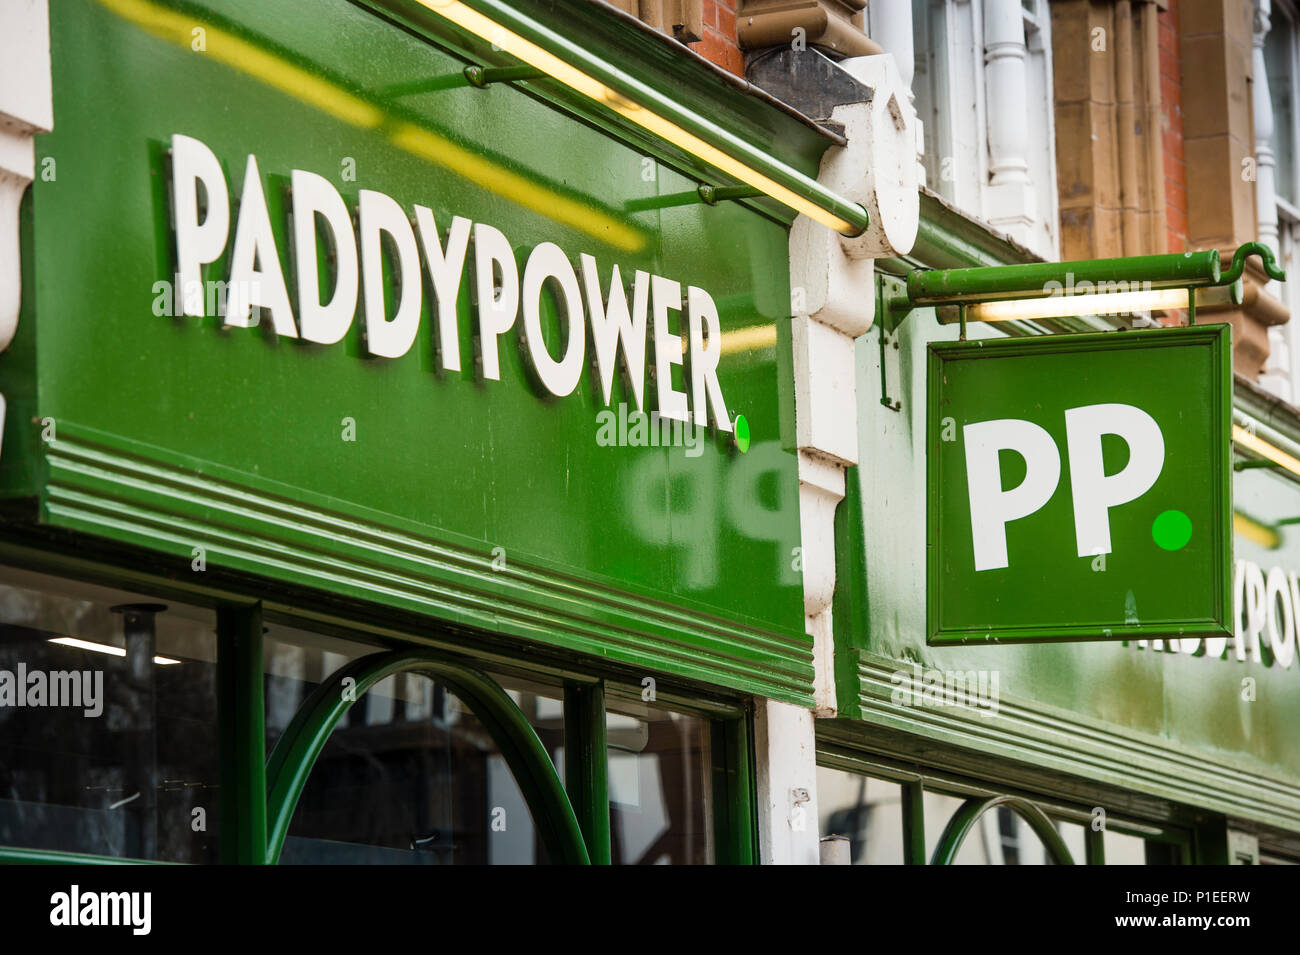 High street gambling in the UK: Paddy Power, PP, betting shop exterior, Hereford, England UK Stock Photo